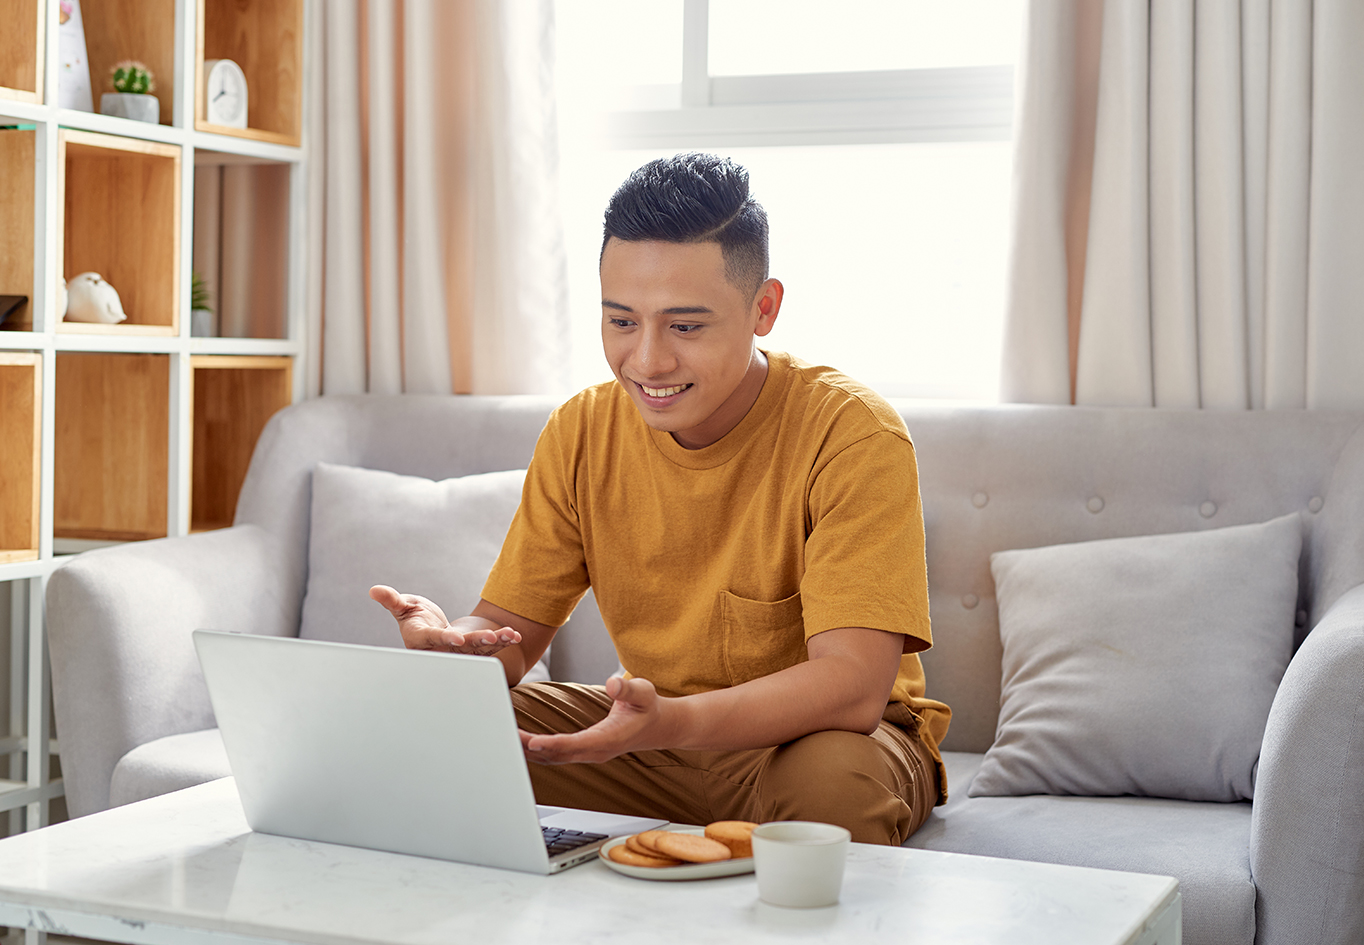 smiling man in a casual shirt, looking down on a laptop, talking to someone, and making hand gestures